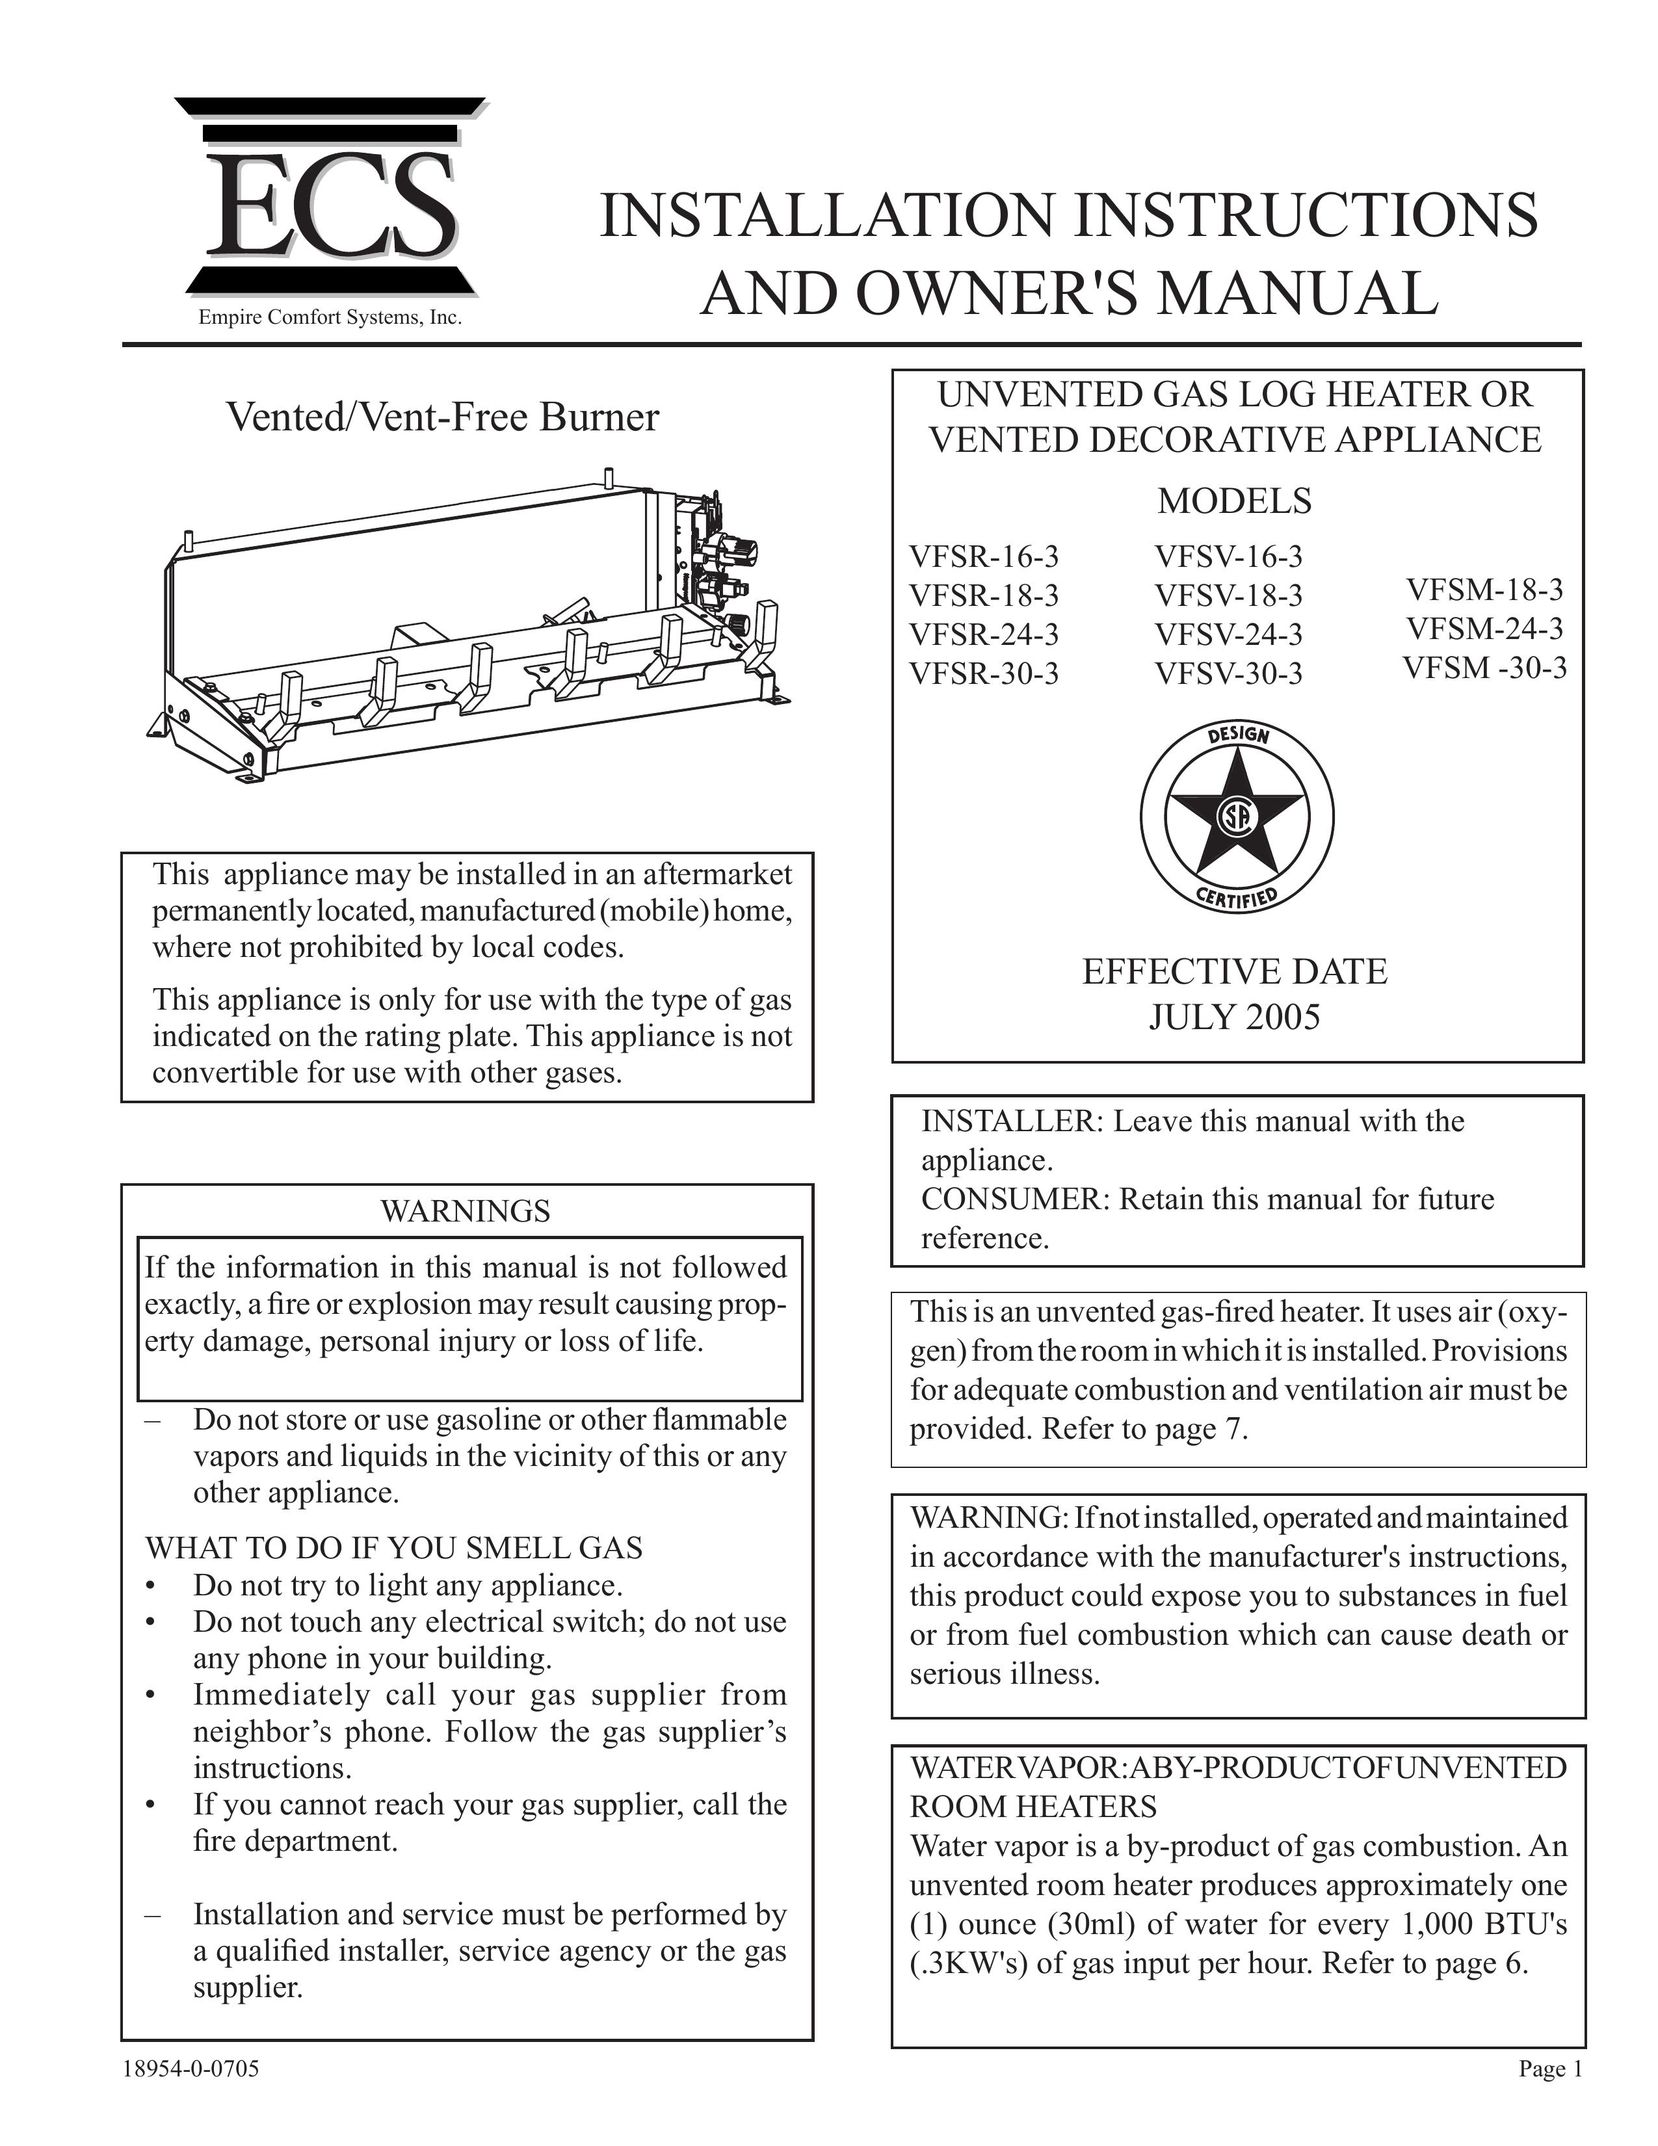 Empire Comfort Systems VFSR-24-3 Electric Heater User Manual